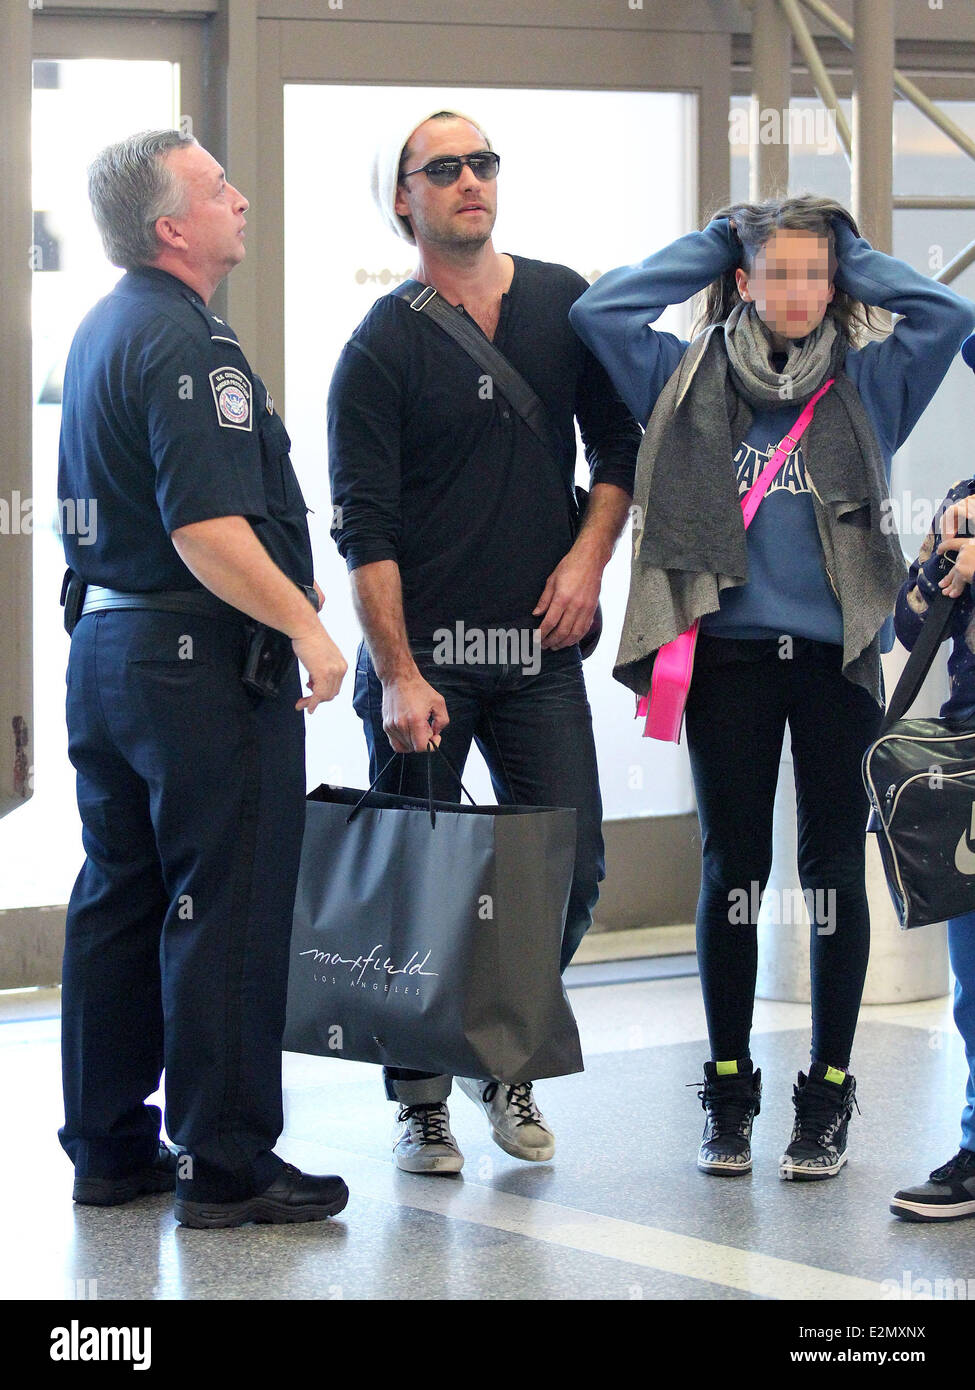 Jude Law with his daughter Iris and son Rudy arrive at Los Angeles International Airport, LAX looking tanned and relaxed after their holiday  Where: Los Angeles, California, United States When: 03 Jan 2013 Stock Photo